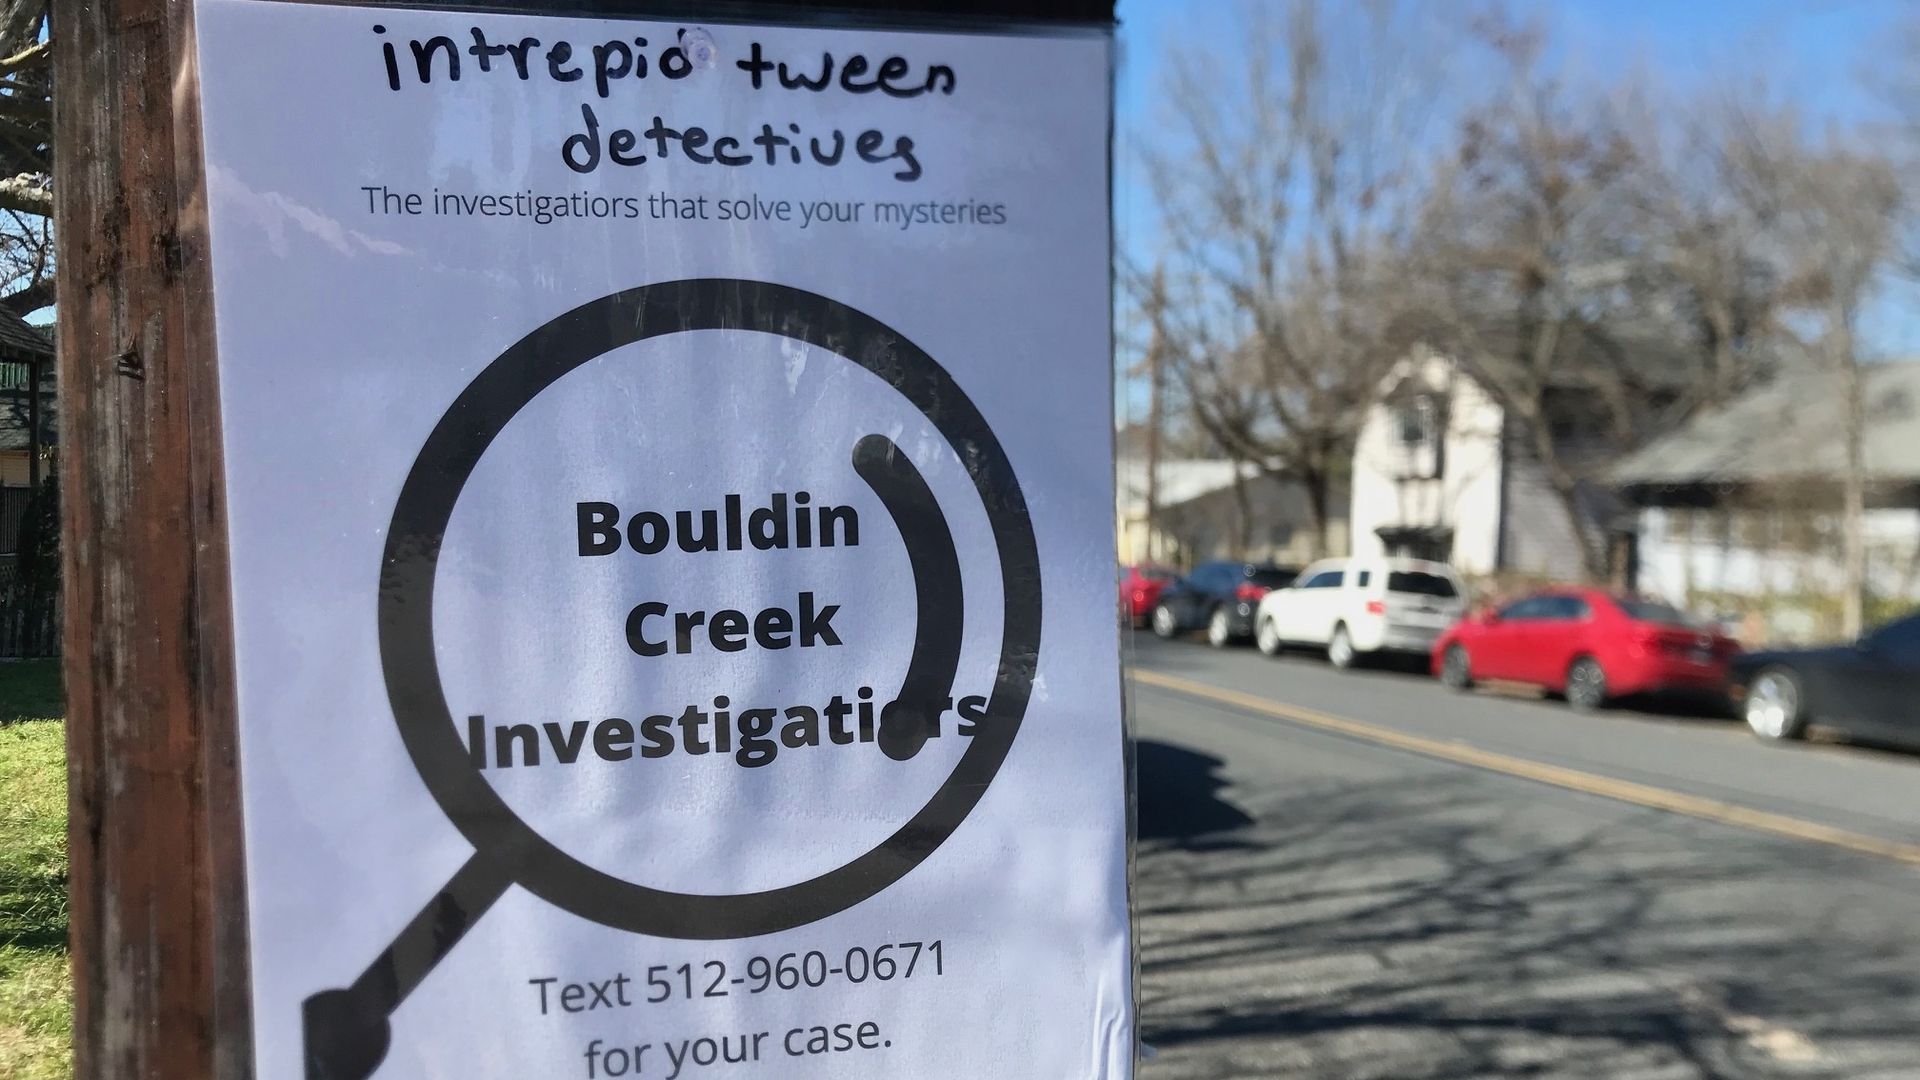 A flyer posted to a telephone pole about private investigators.